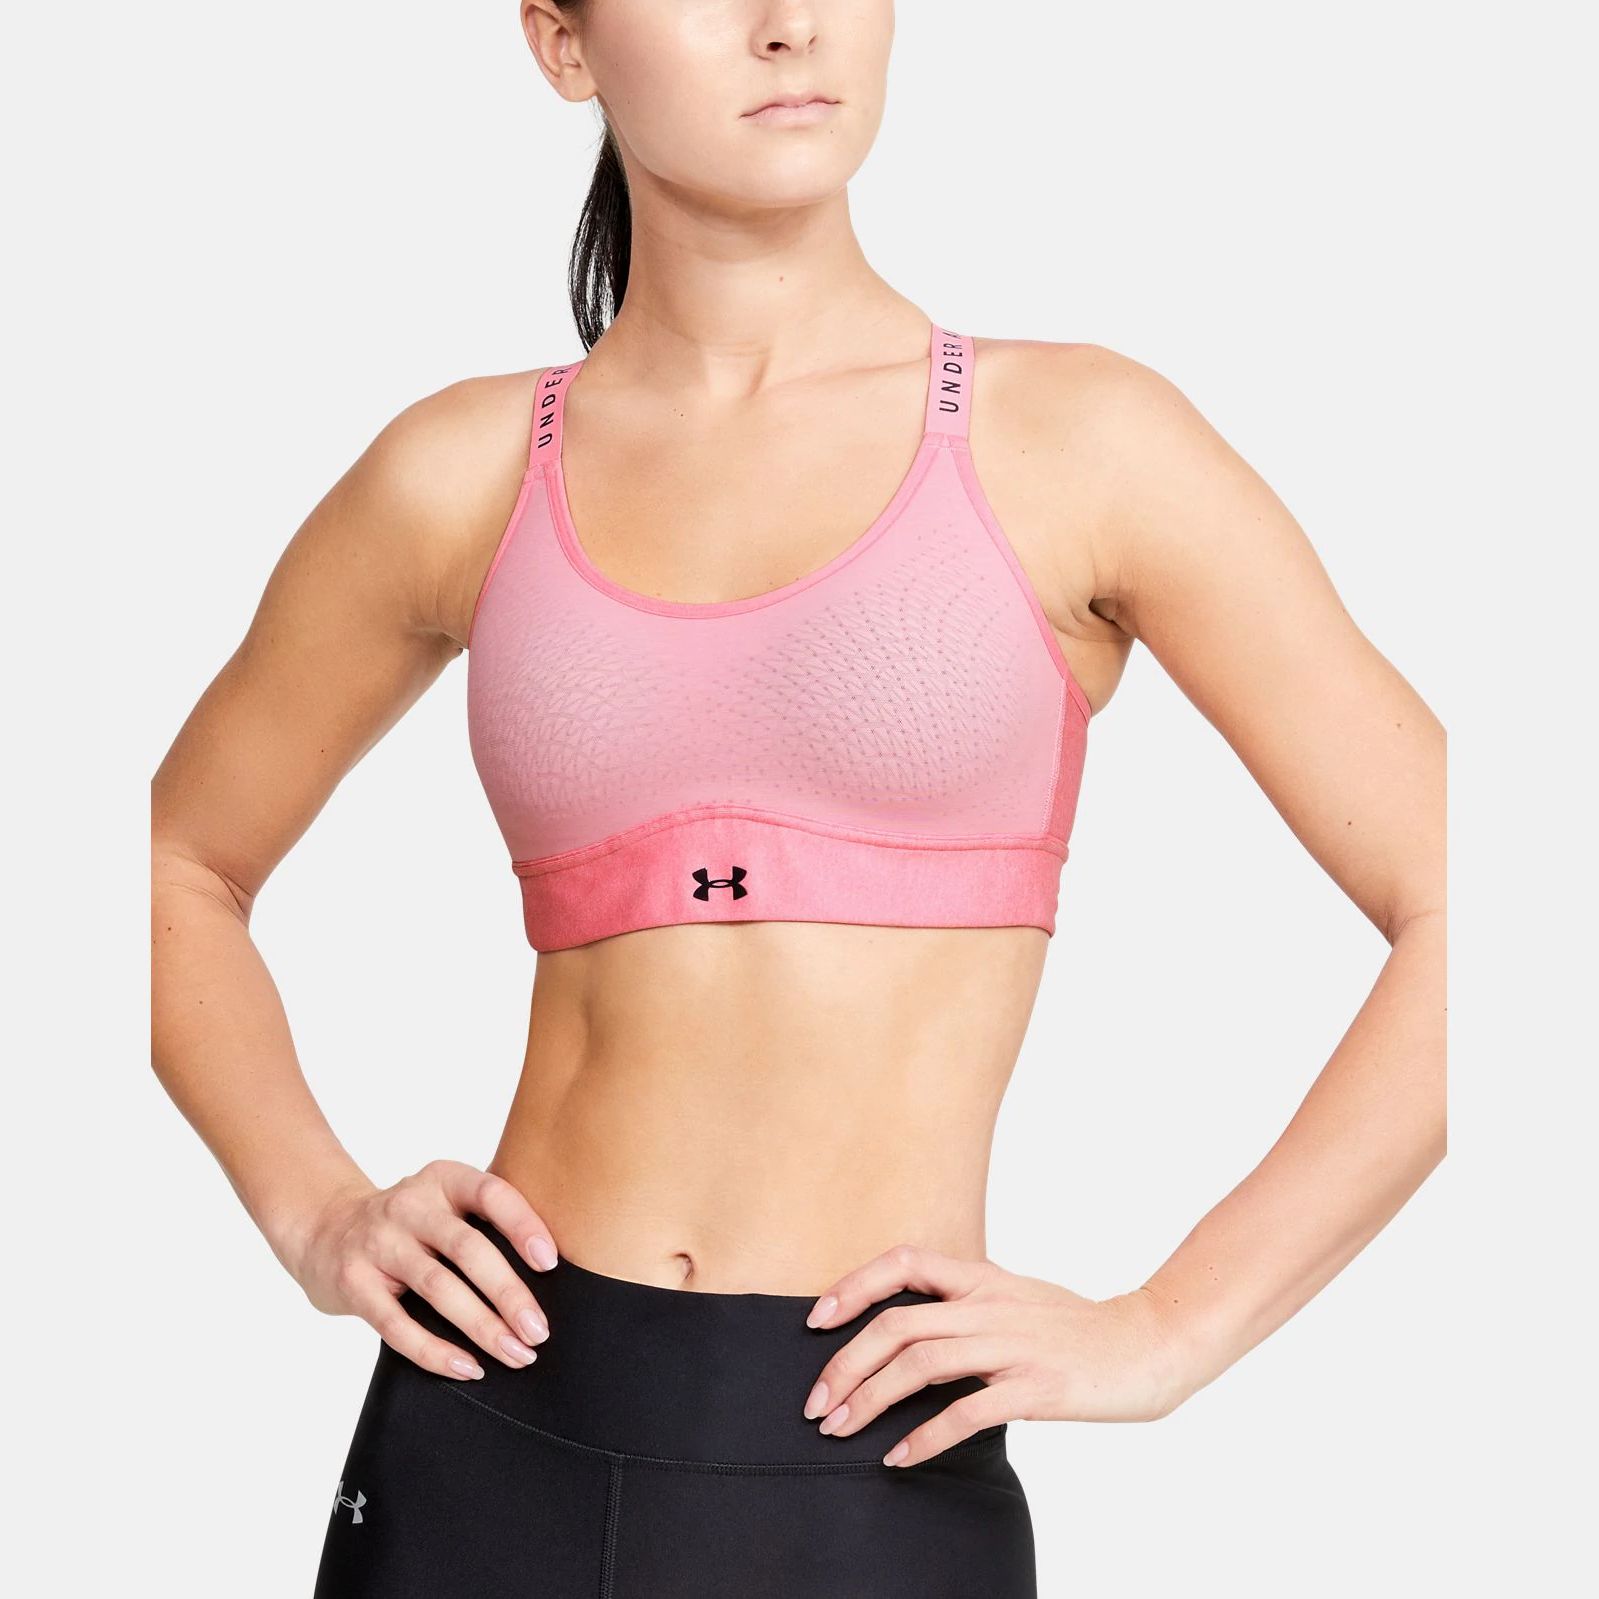 https://img1.sportconcept.com/backend_nou/content/images/-infinity-mid-heather-sports-bra-4314-20200504162548.jpg